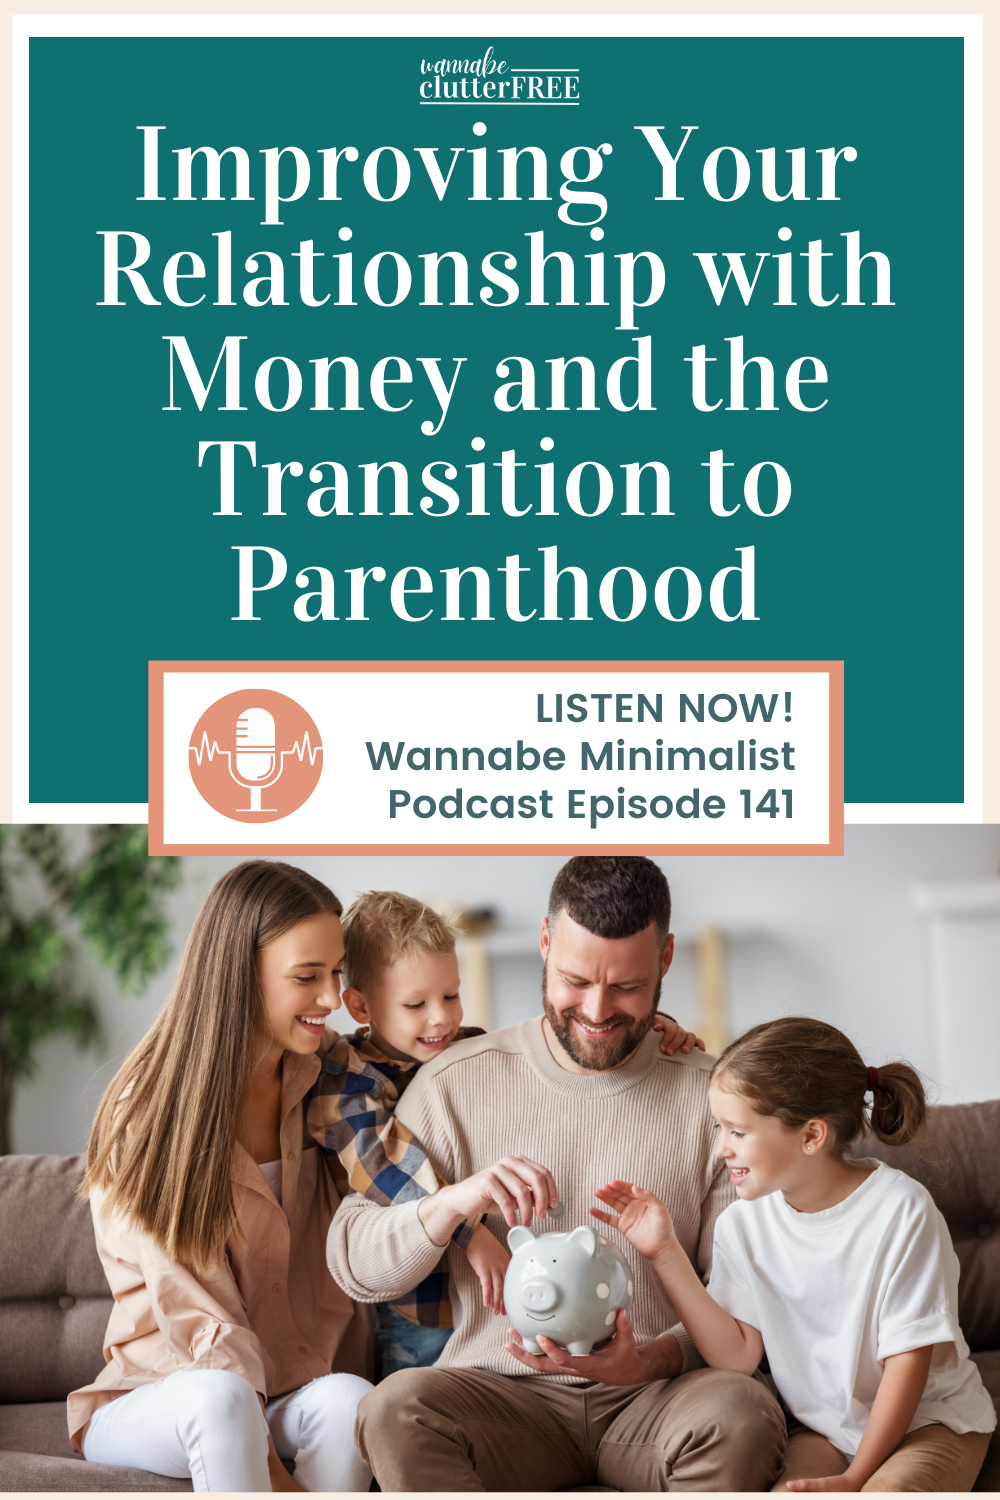 Improving Your Relationship with Money and the Transition to Parenthood